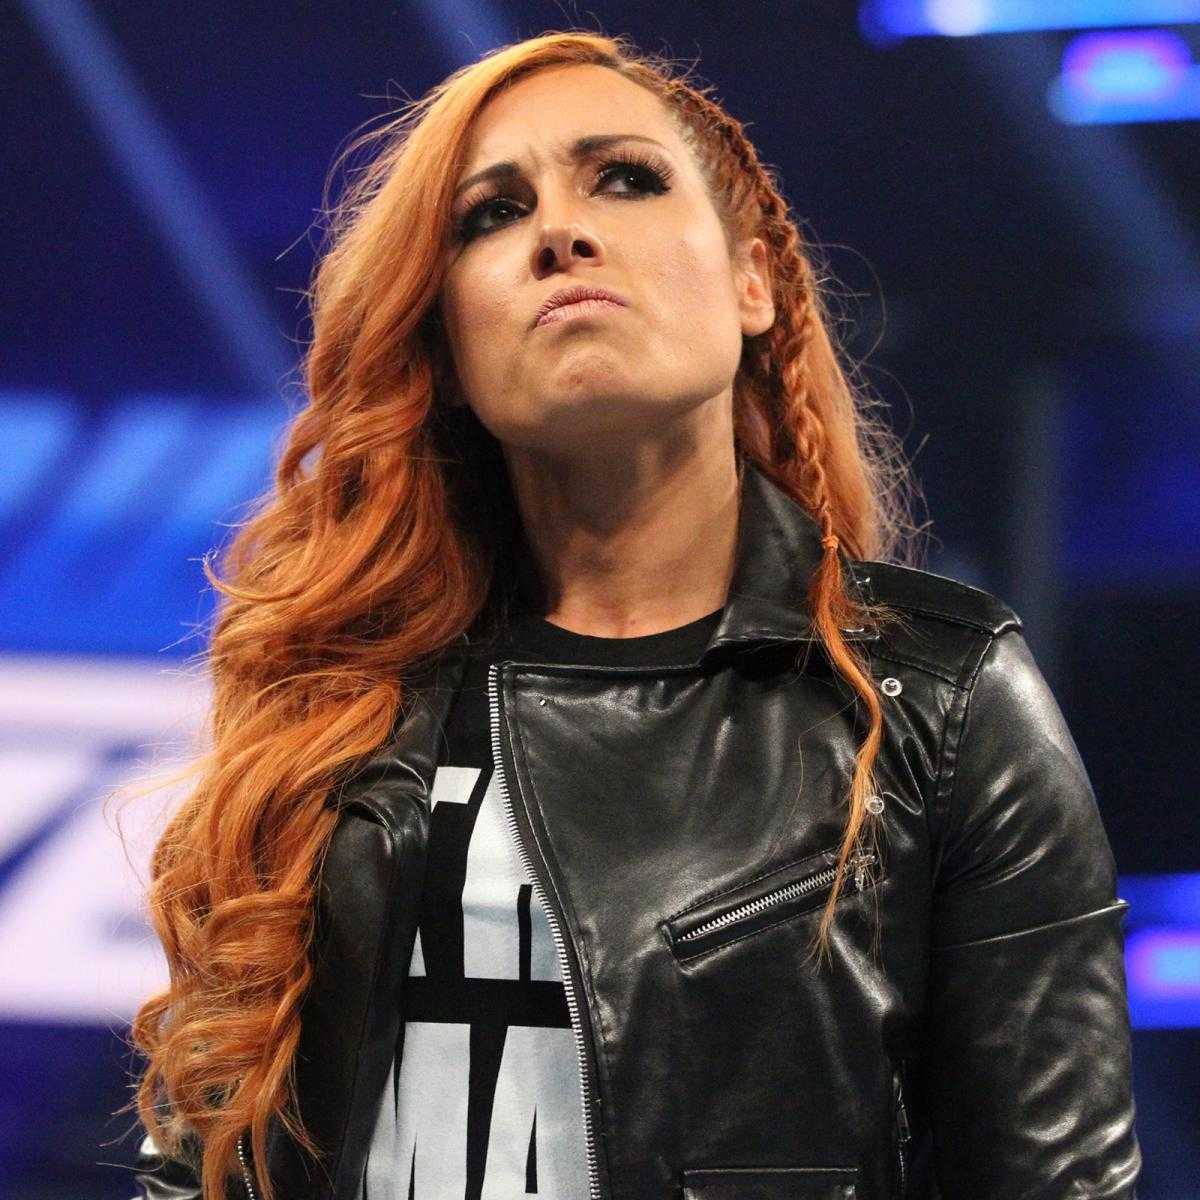 70+ Hot And Sexy Pictures of Becky Lynch – WWE Diva Will Sizzle You Up 56